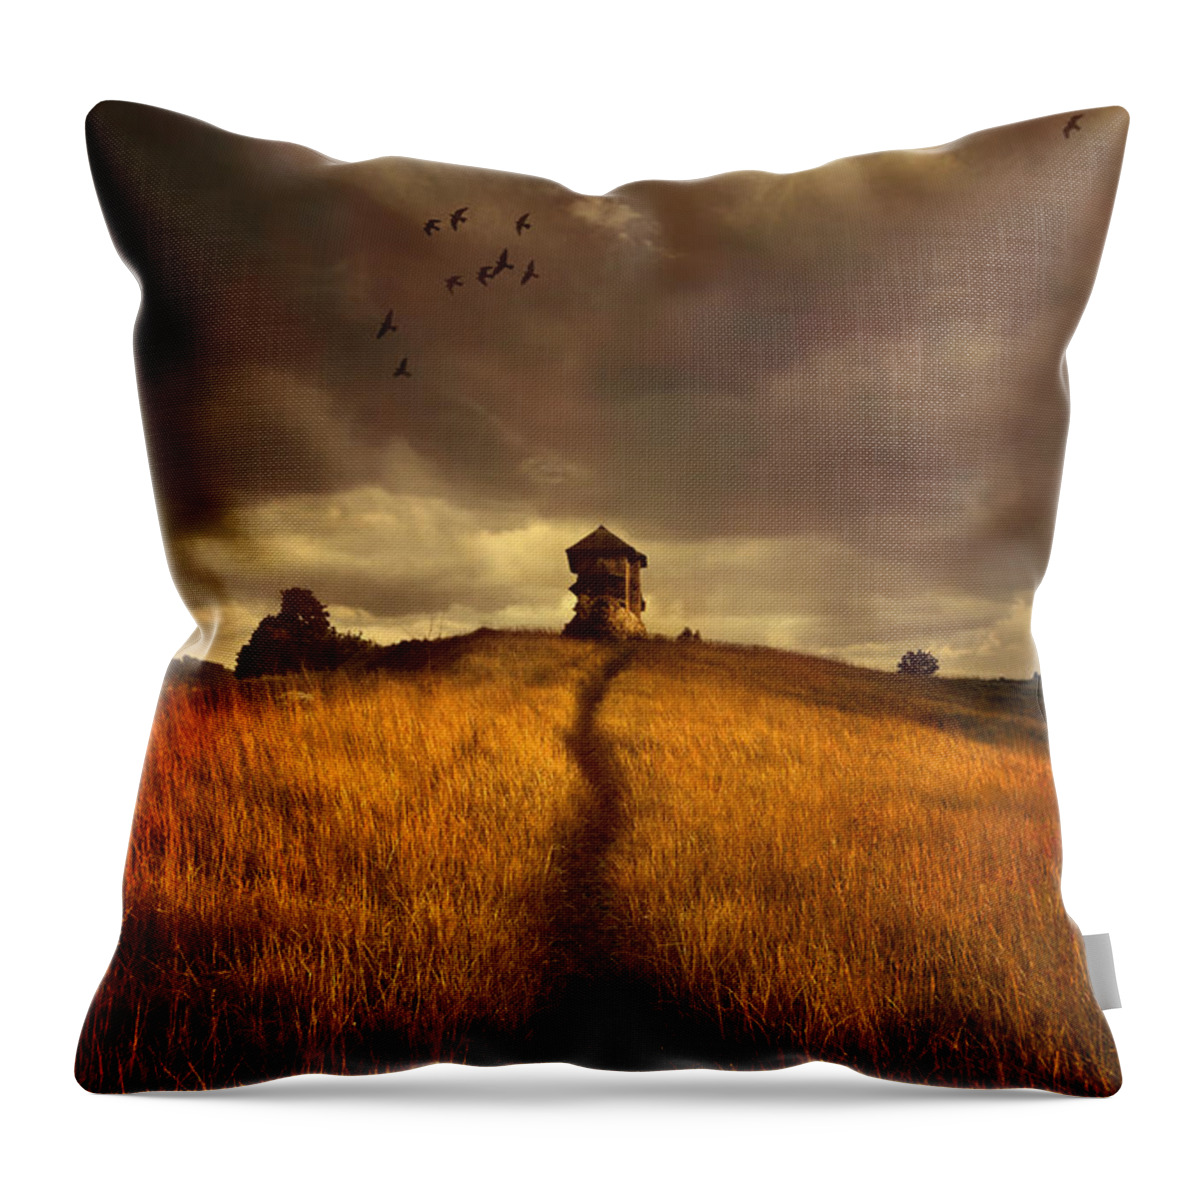 House On The Field Throw Pillow featuring the photograph Lonely house on the hill by Jaroslaw Blaminsky